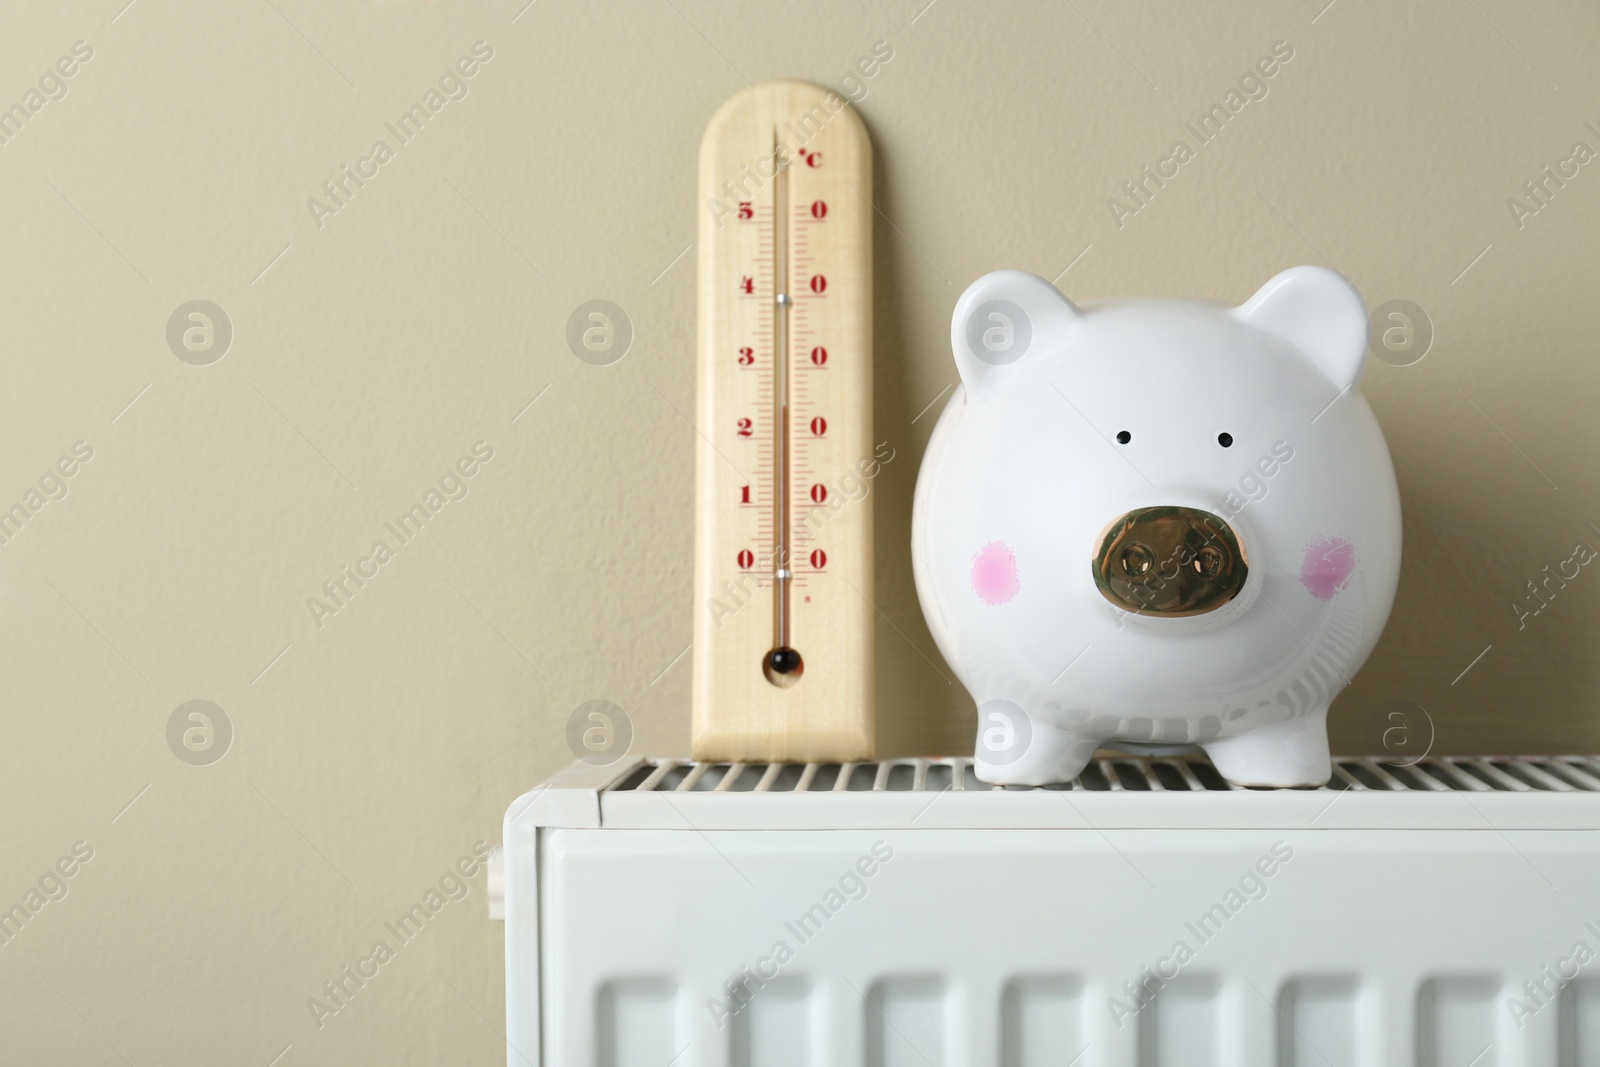 Photo of Piggy bank and thermometer on heating radiator against beige background